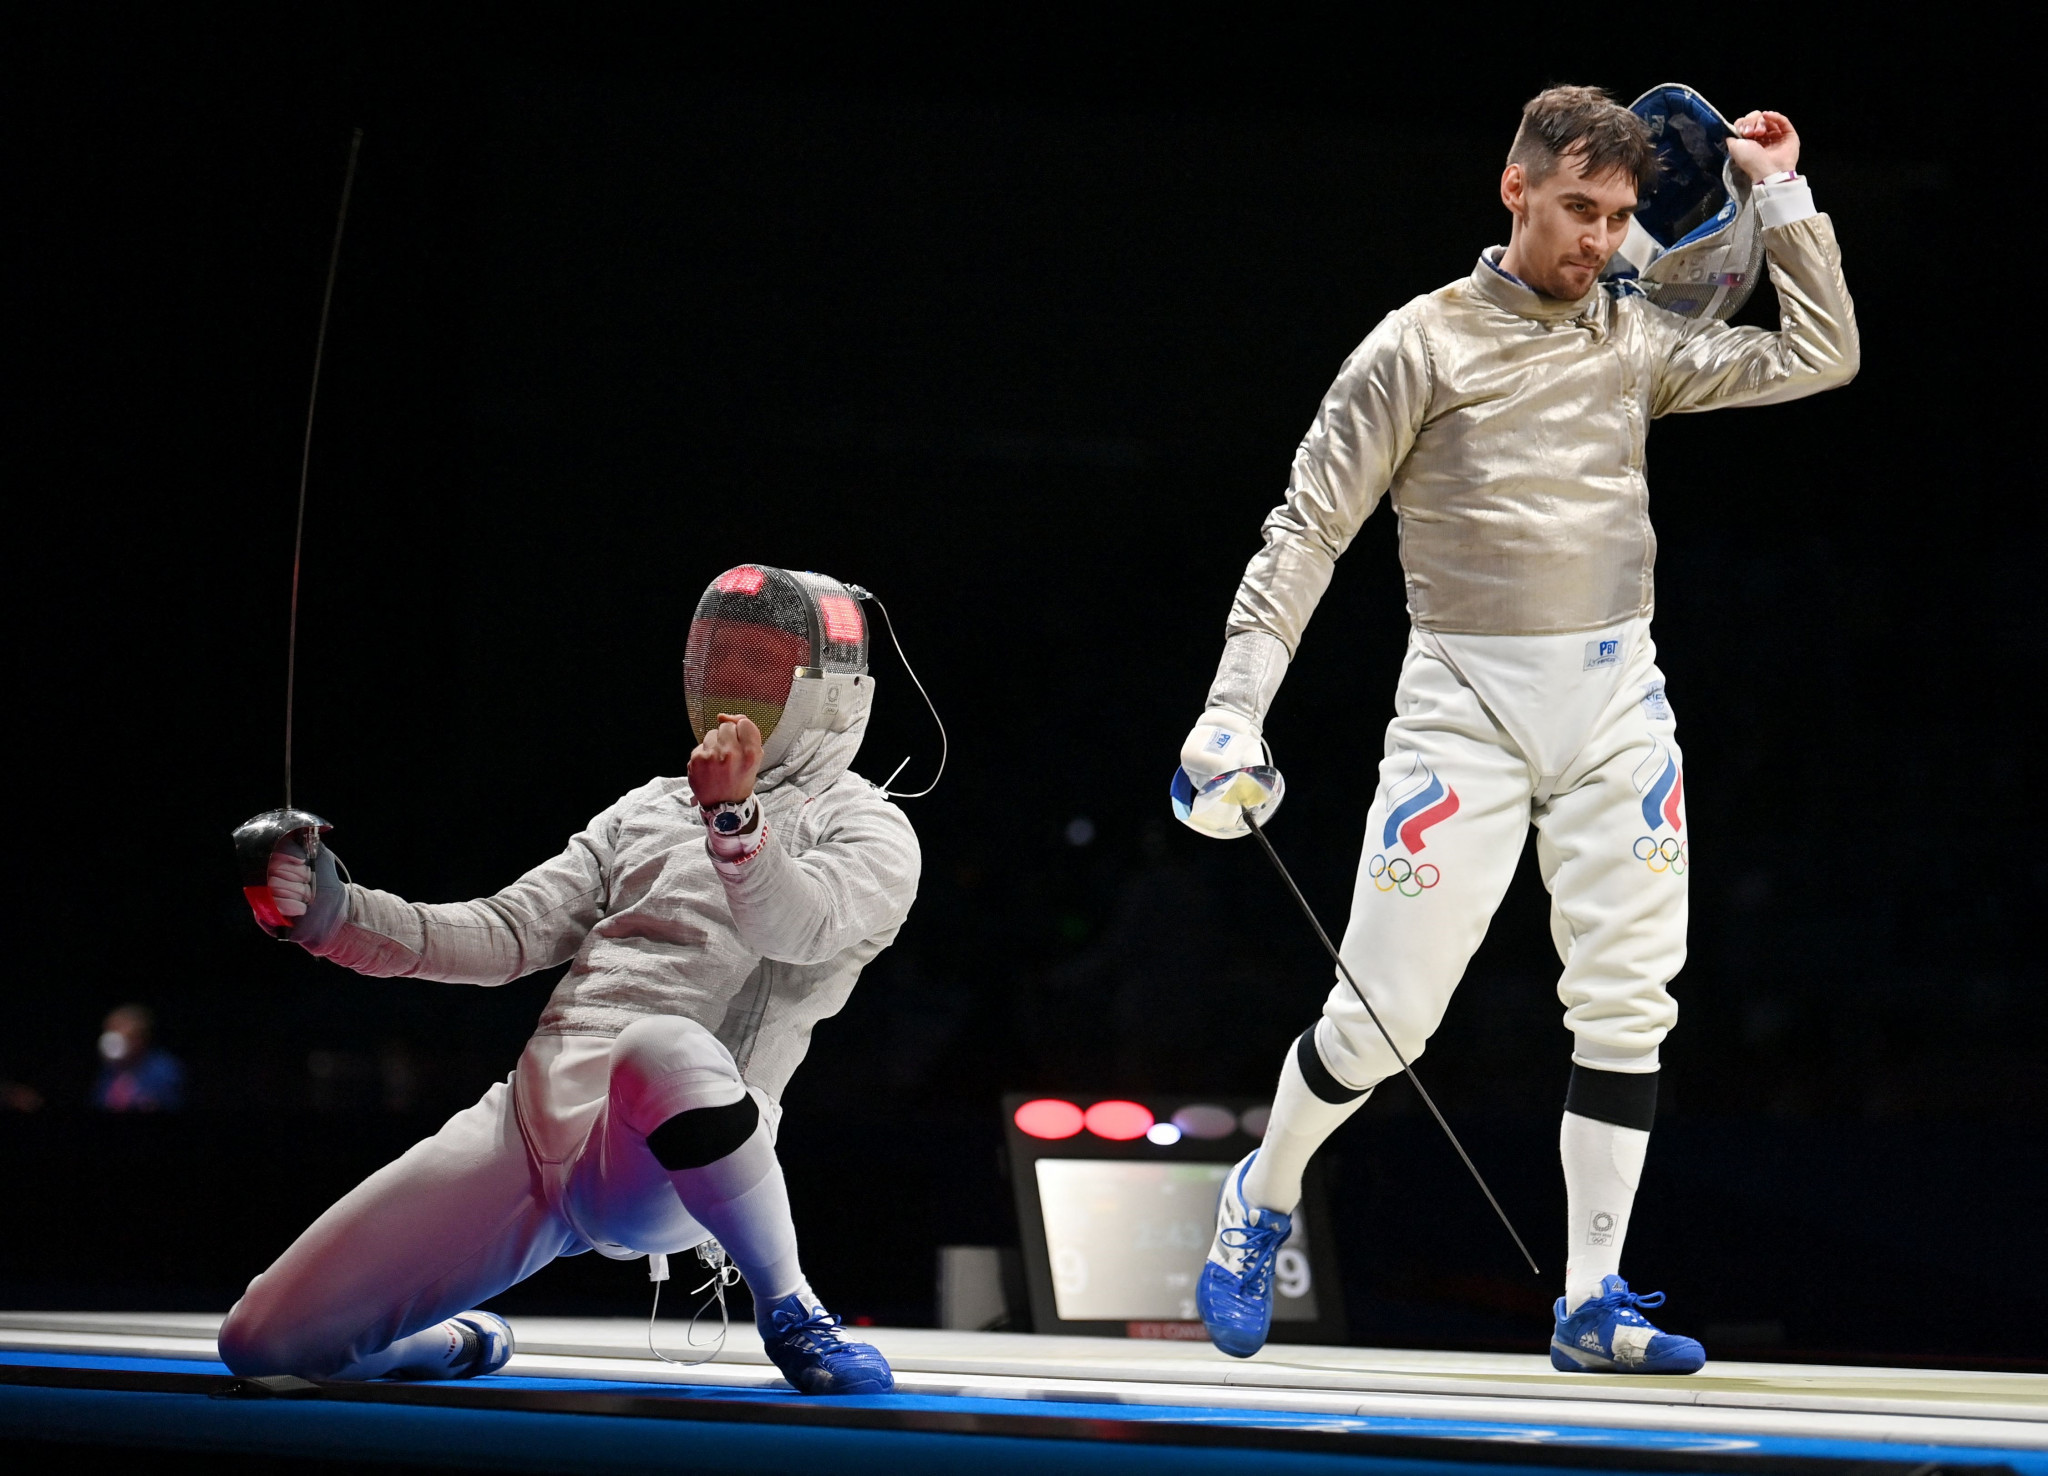 Russian fencers have been denied the chance to compete at the Sabre Grand Prix in Seoul over what FFR President Ilgar Mammadov has described as 